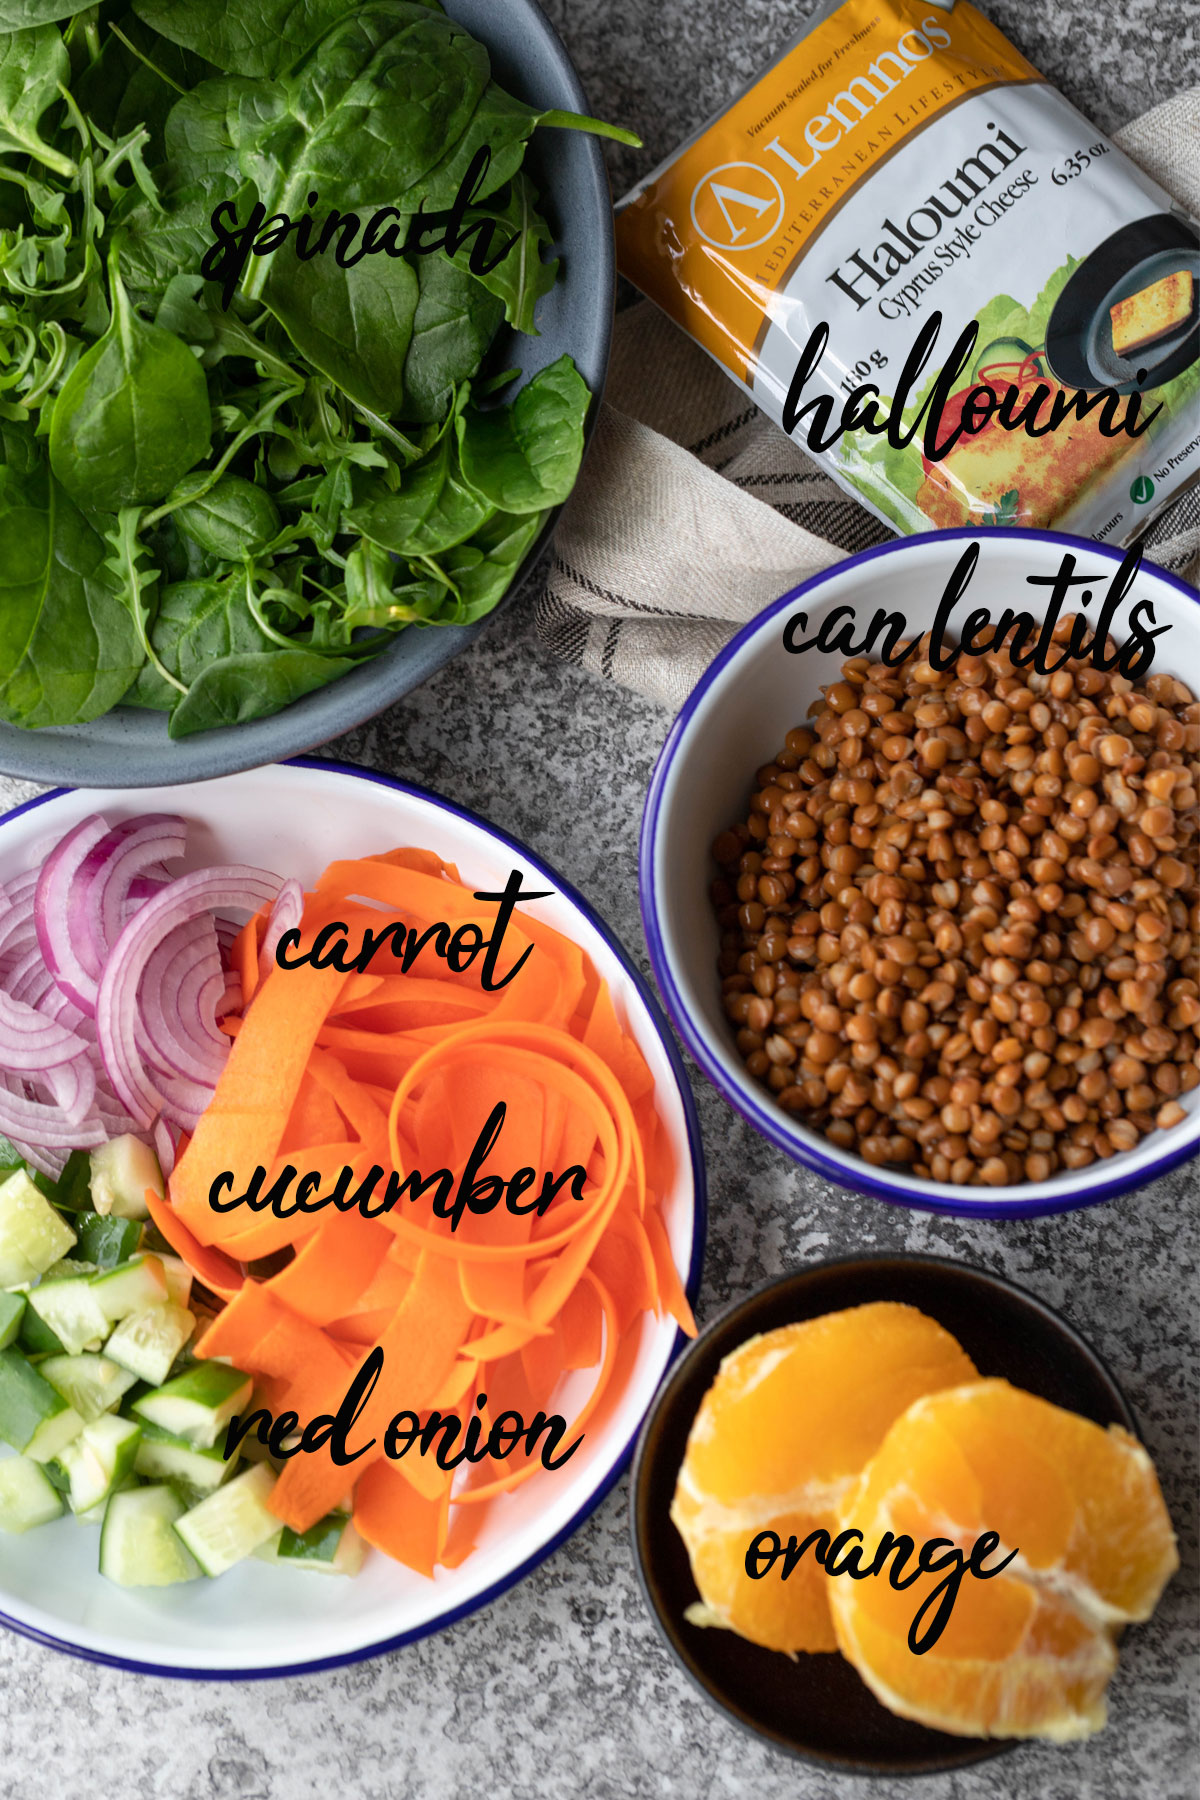 lentil halloumi salad ingredients from top - spinach, halloumi, can lentils, carrot, cucumber, red onion and orange